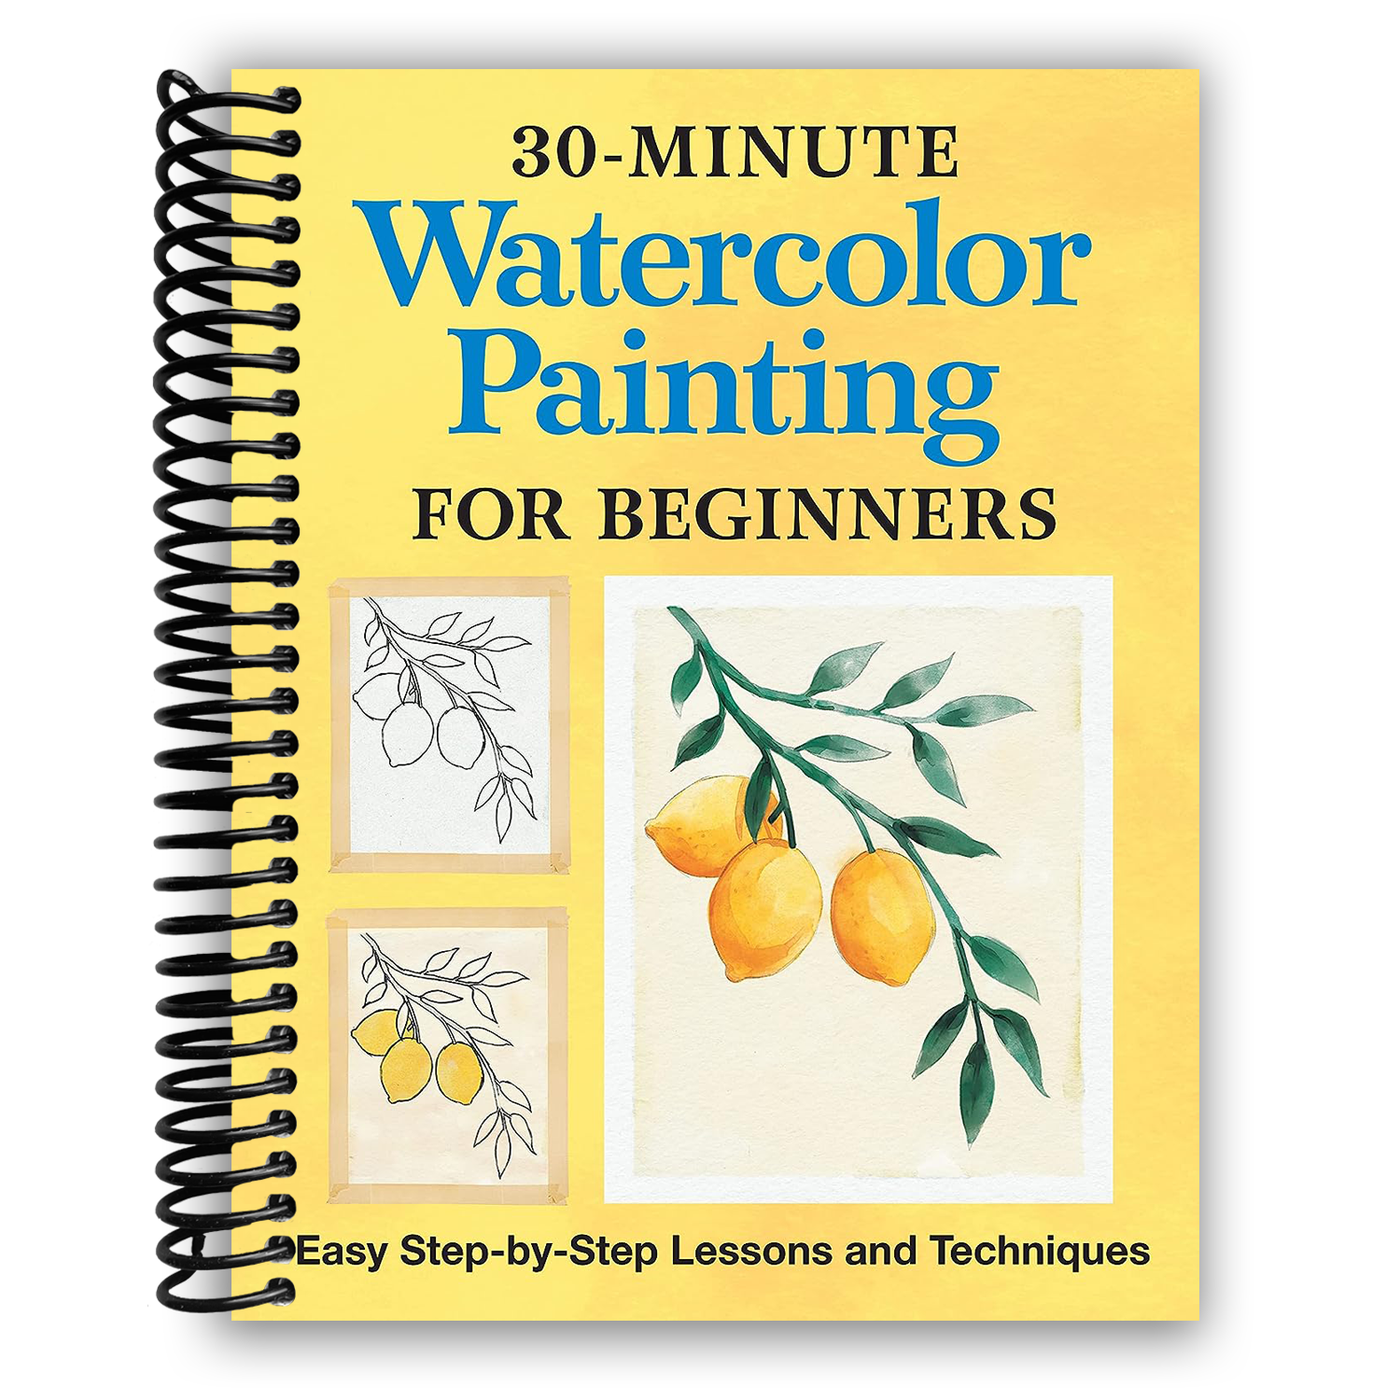 30-Minute Watercolor Painting for Beginners (Spiral Bound)